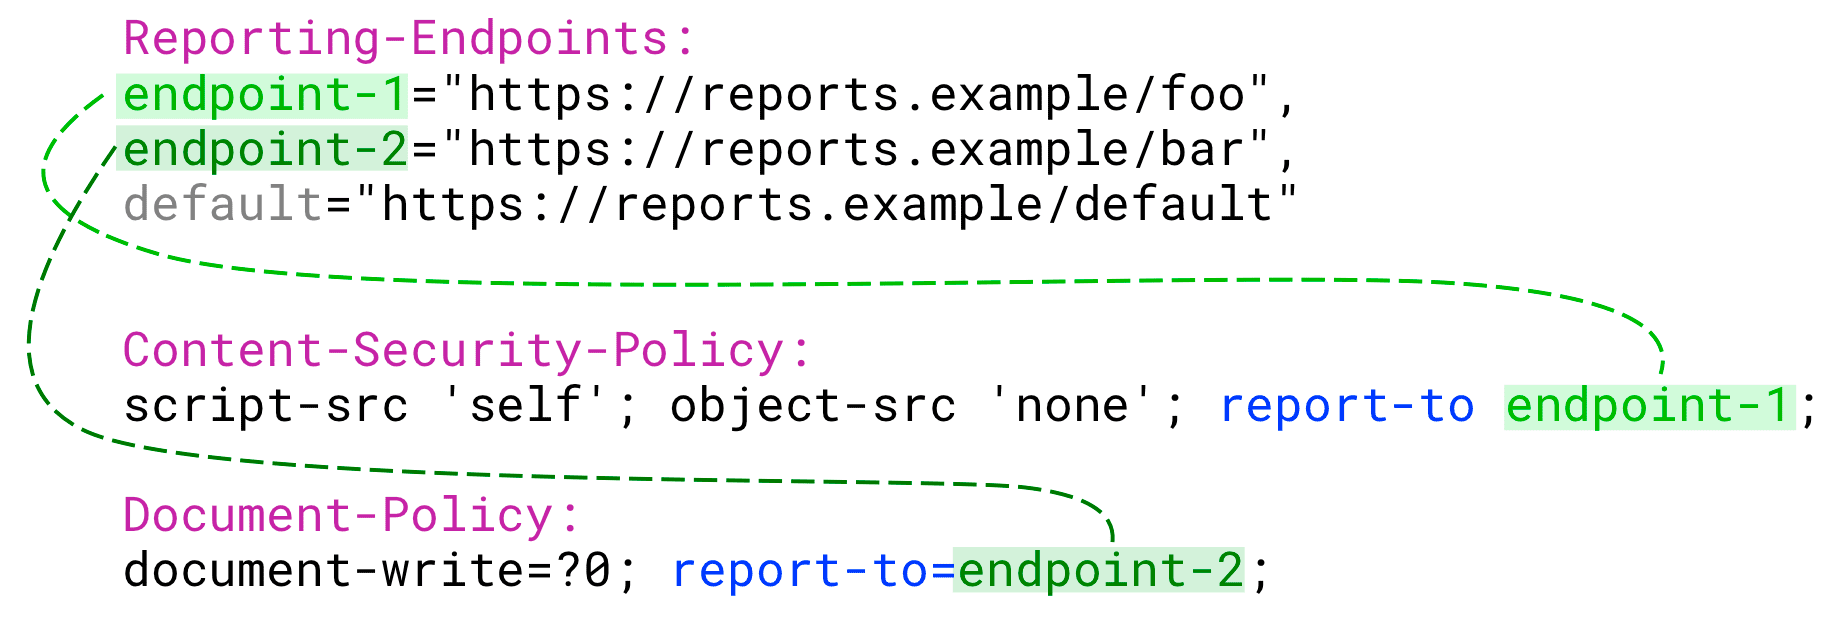 For each policy, the value of report-to should be one of the named endpoints you've configured.